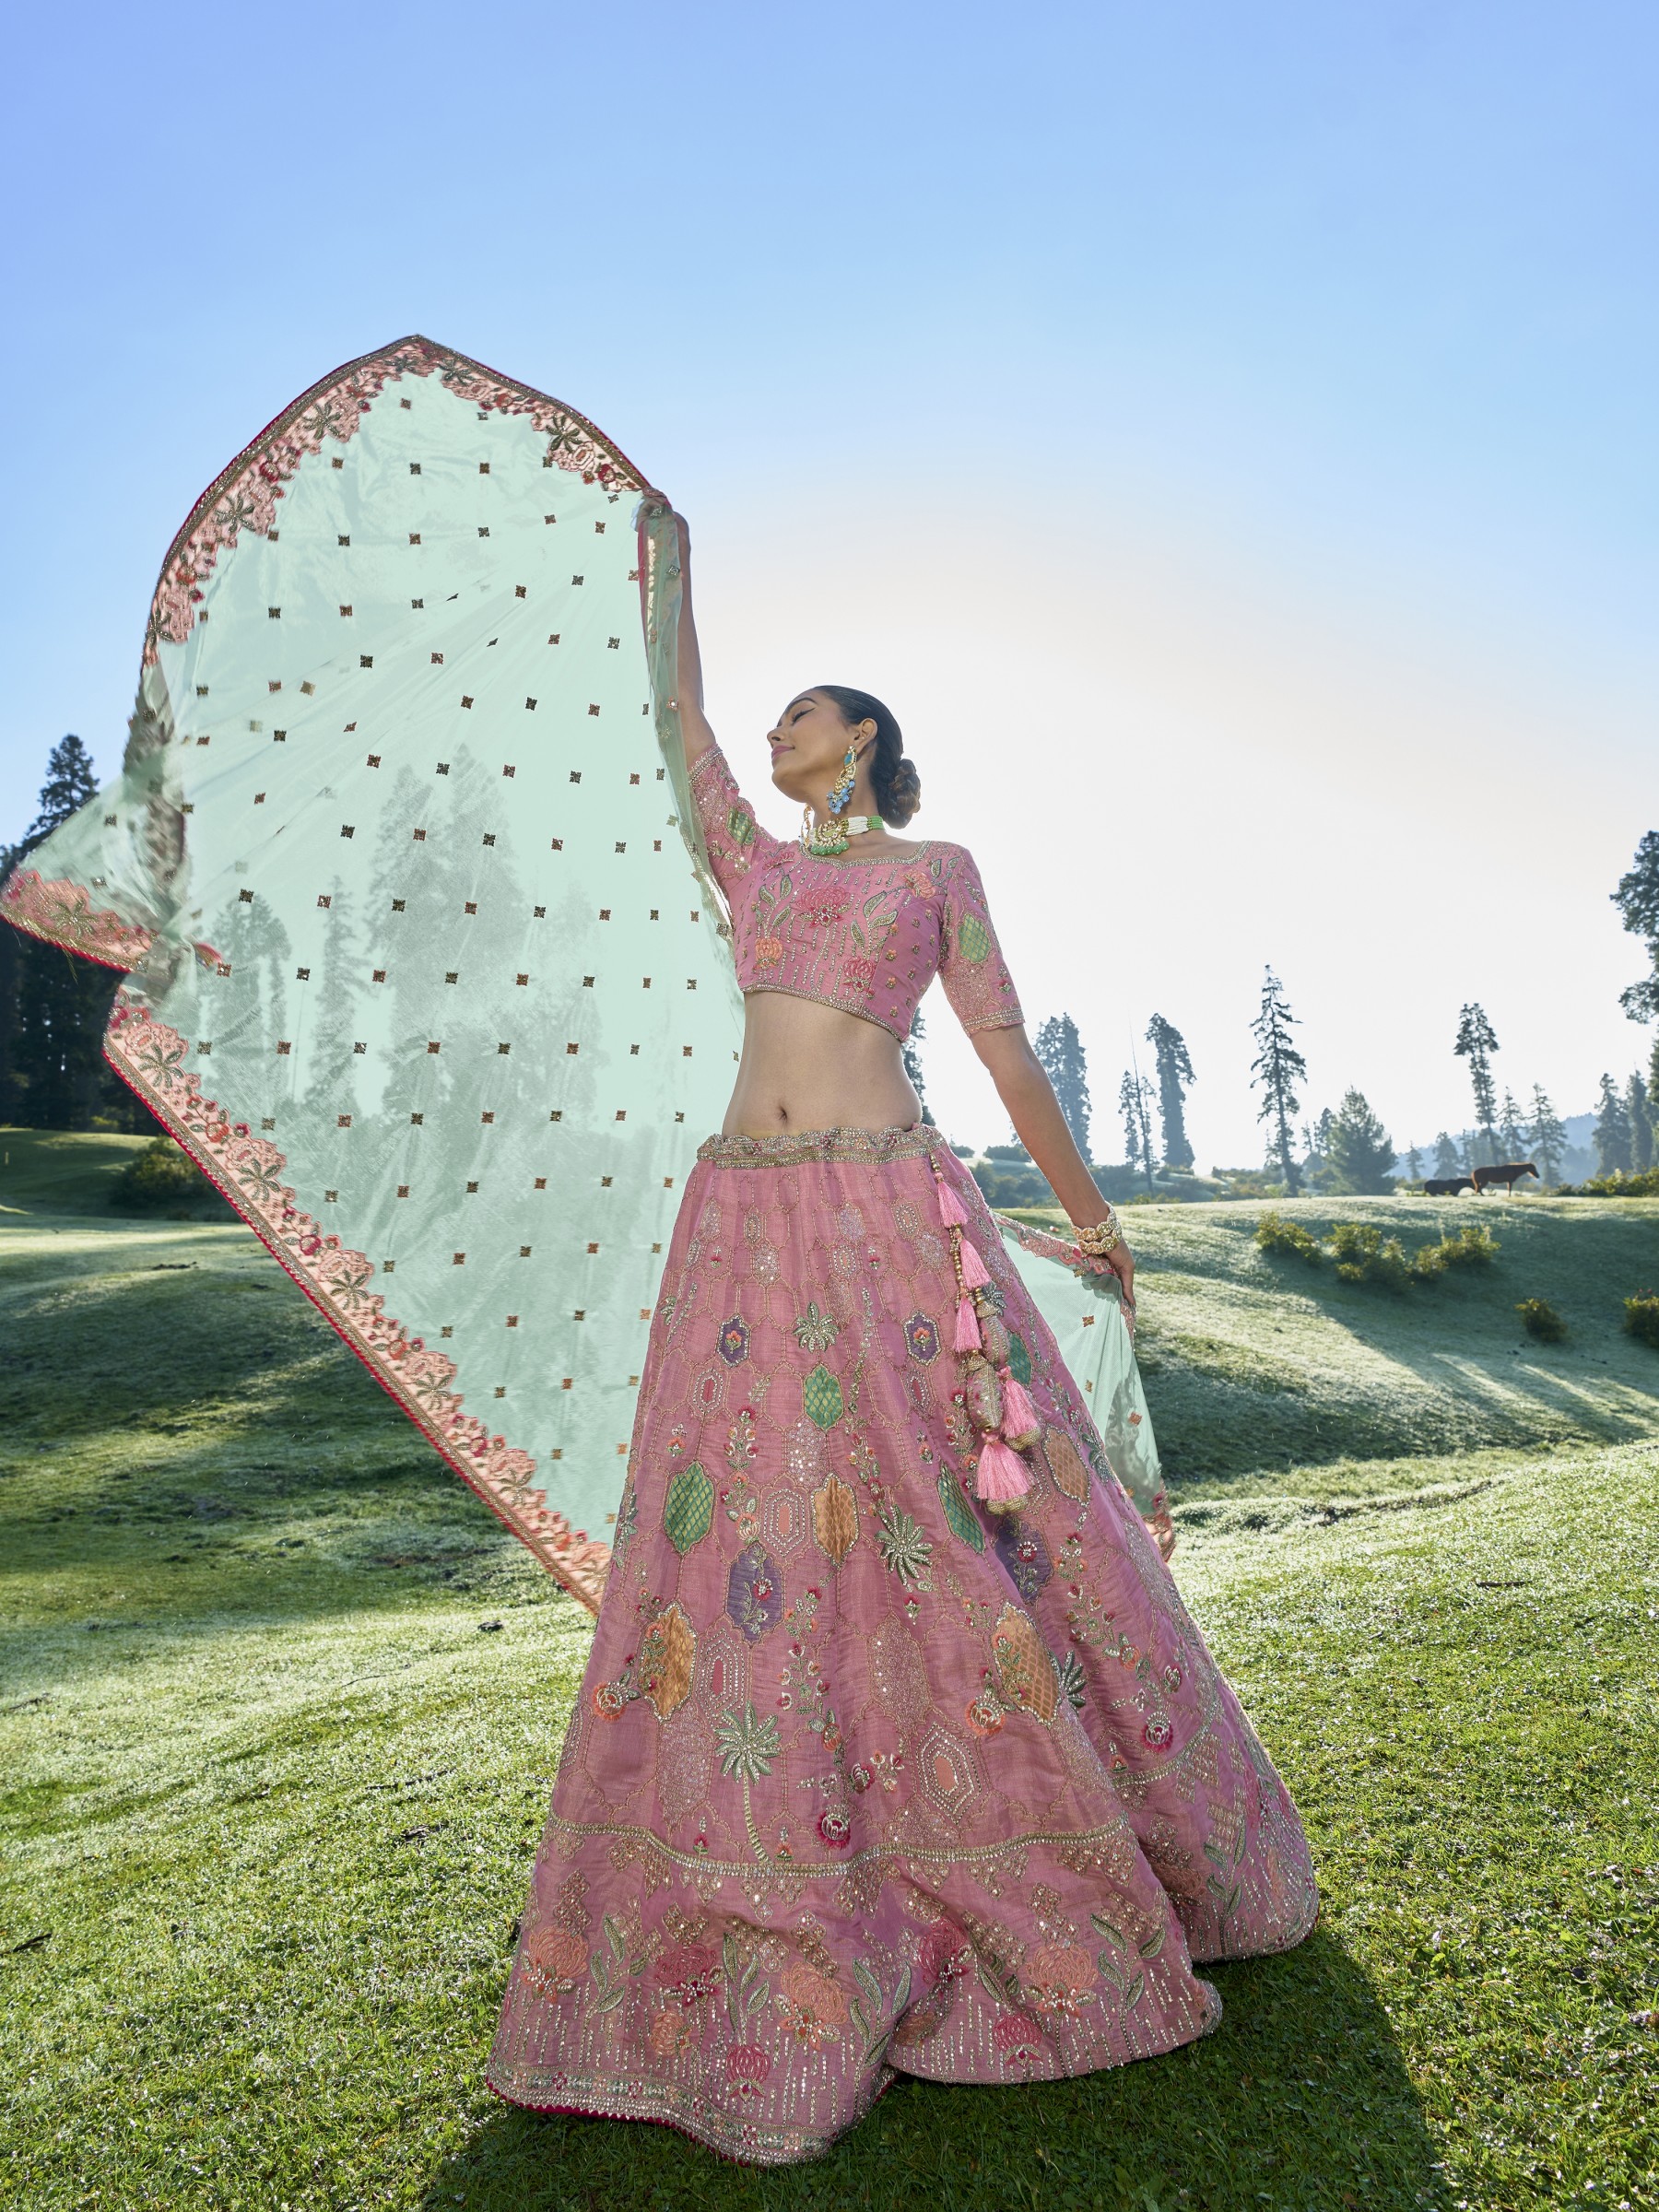 Pure Dola Silk Wedding Lehenga in Pink Color With Embroidery work